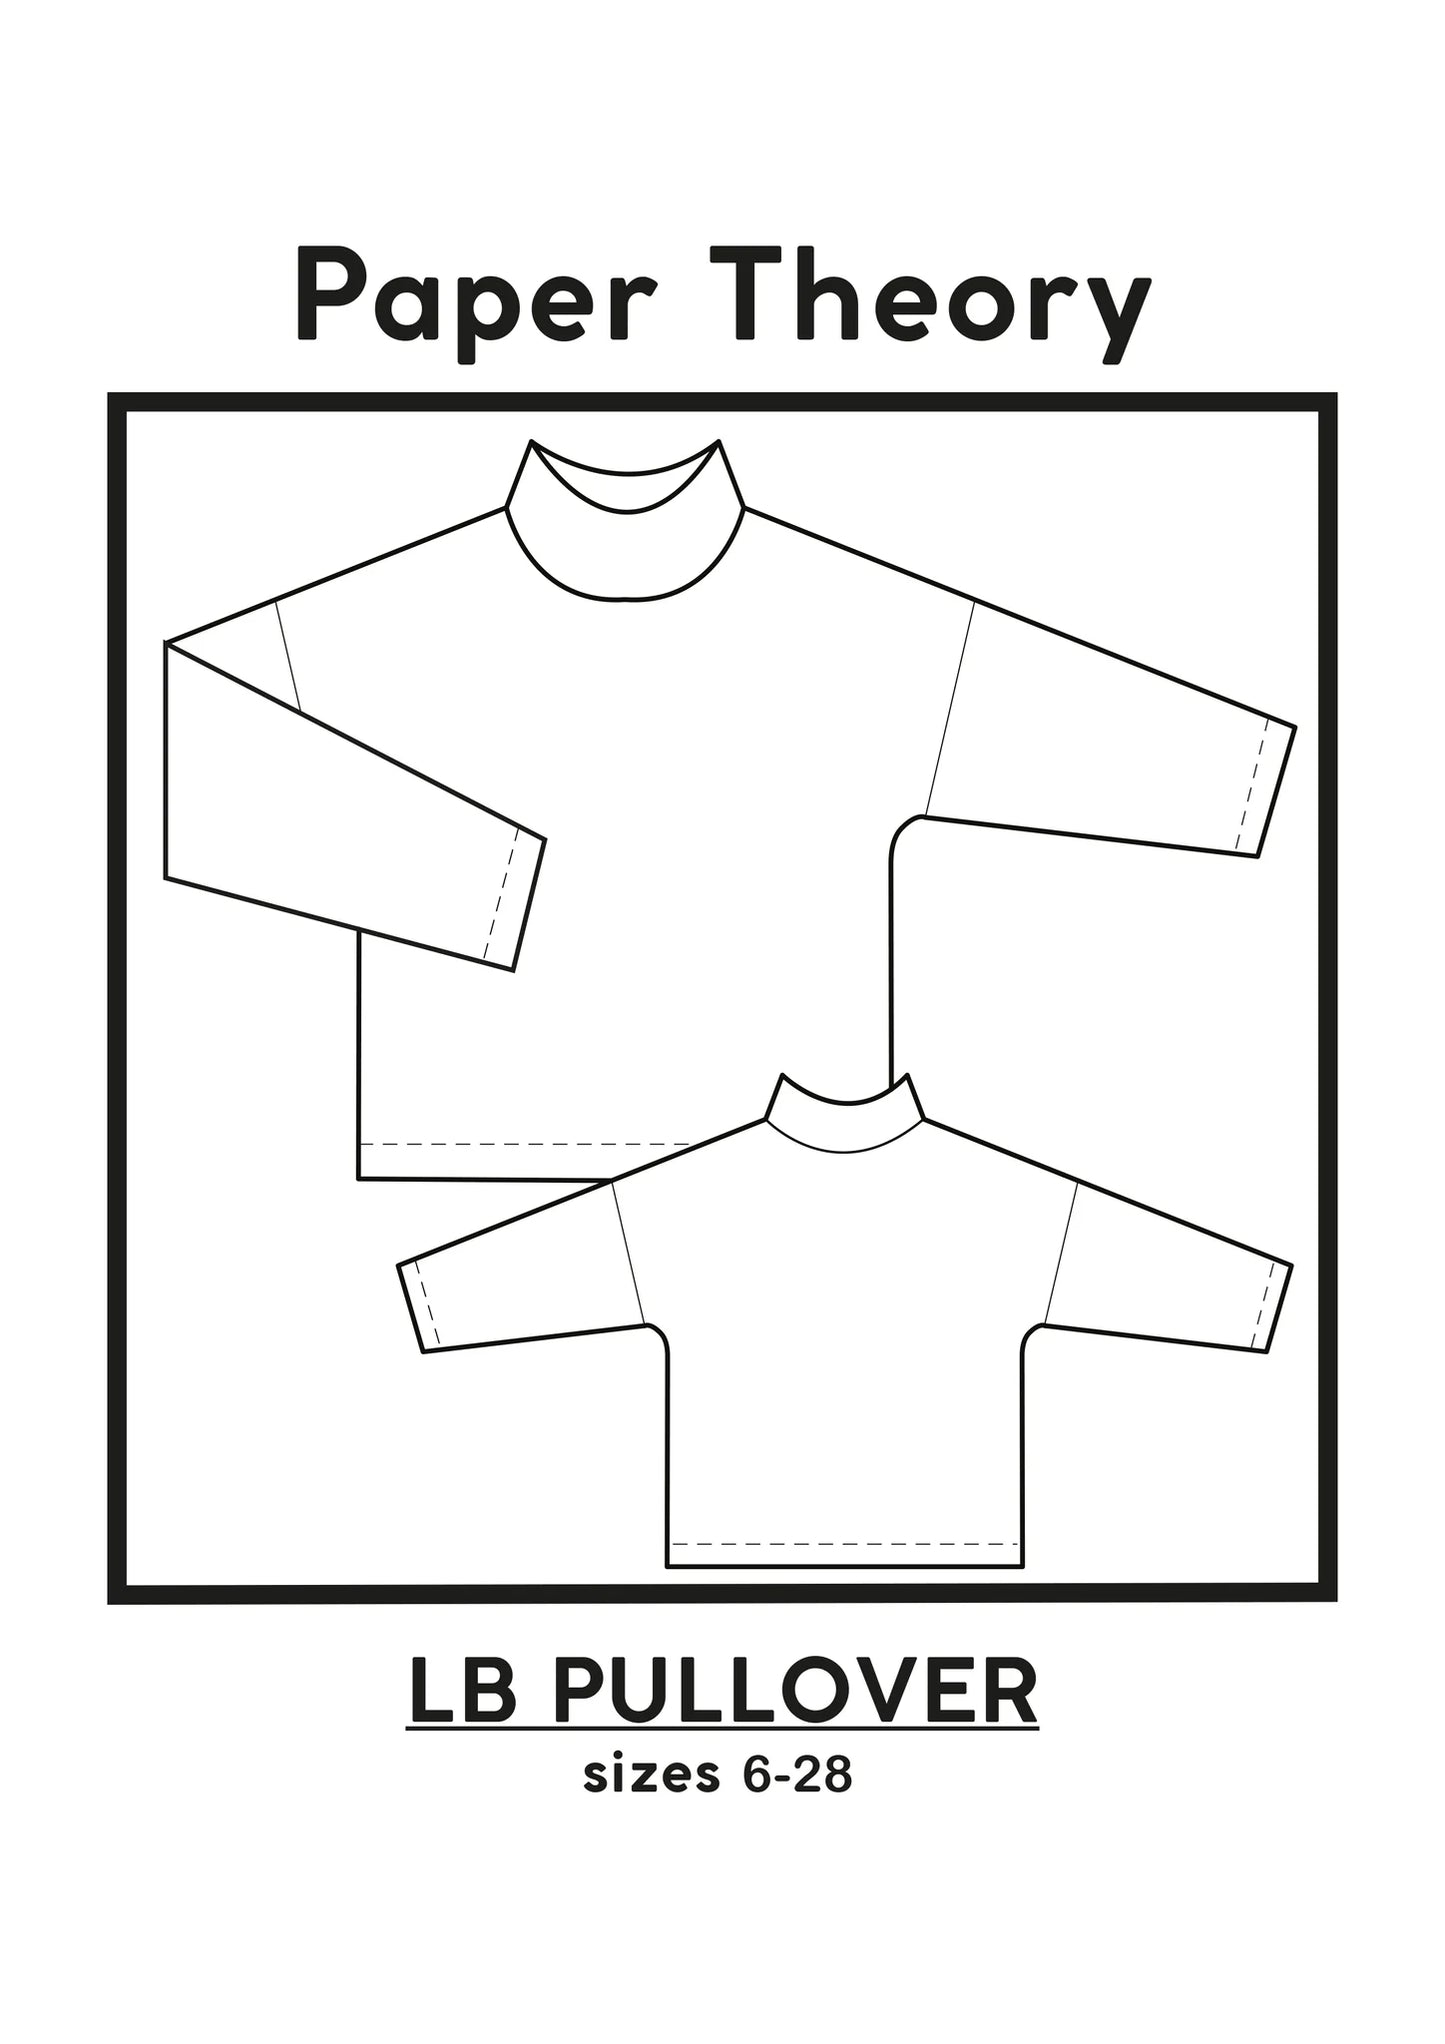 LB Pullover - Patron papier -  Paper Theory